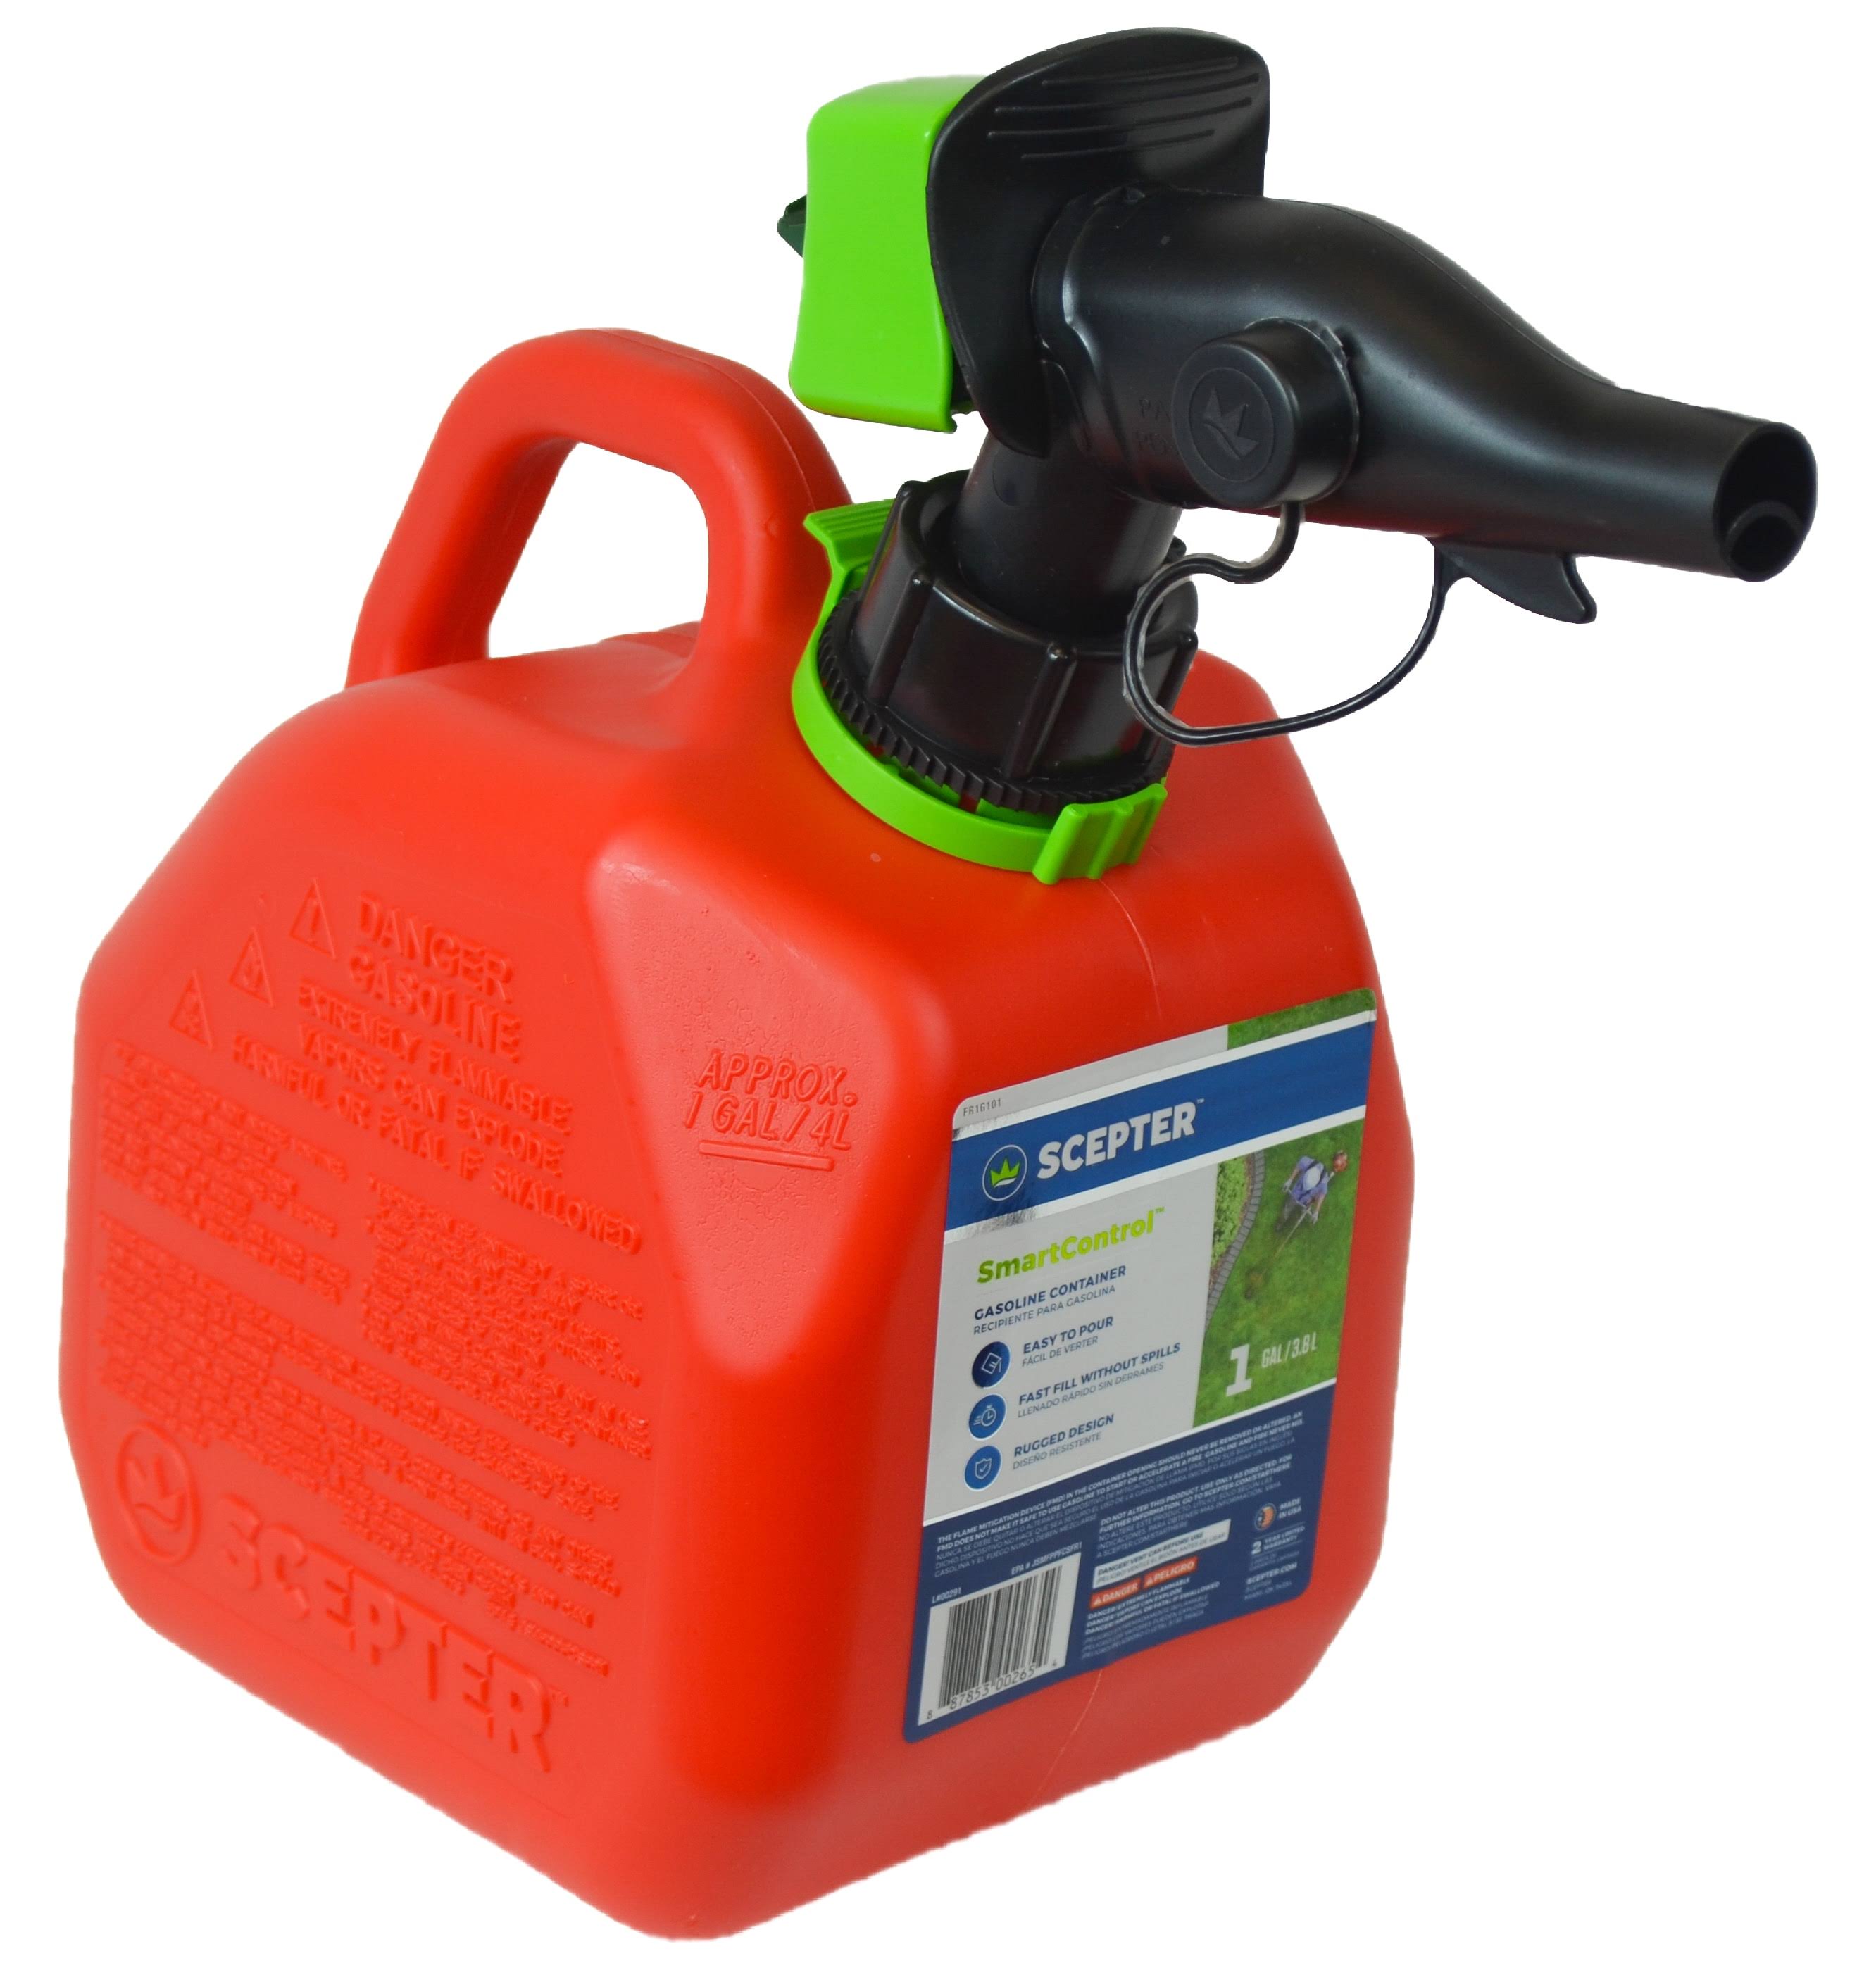 Scepter FR1G101 Smart Control Gas Can - 1gal